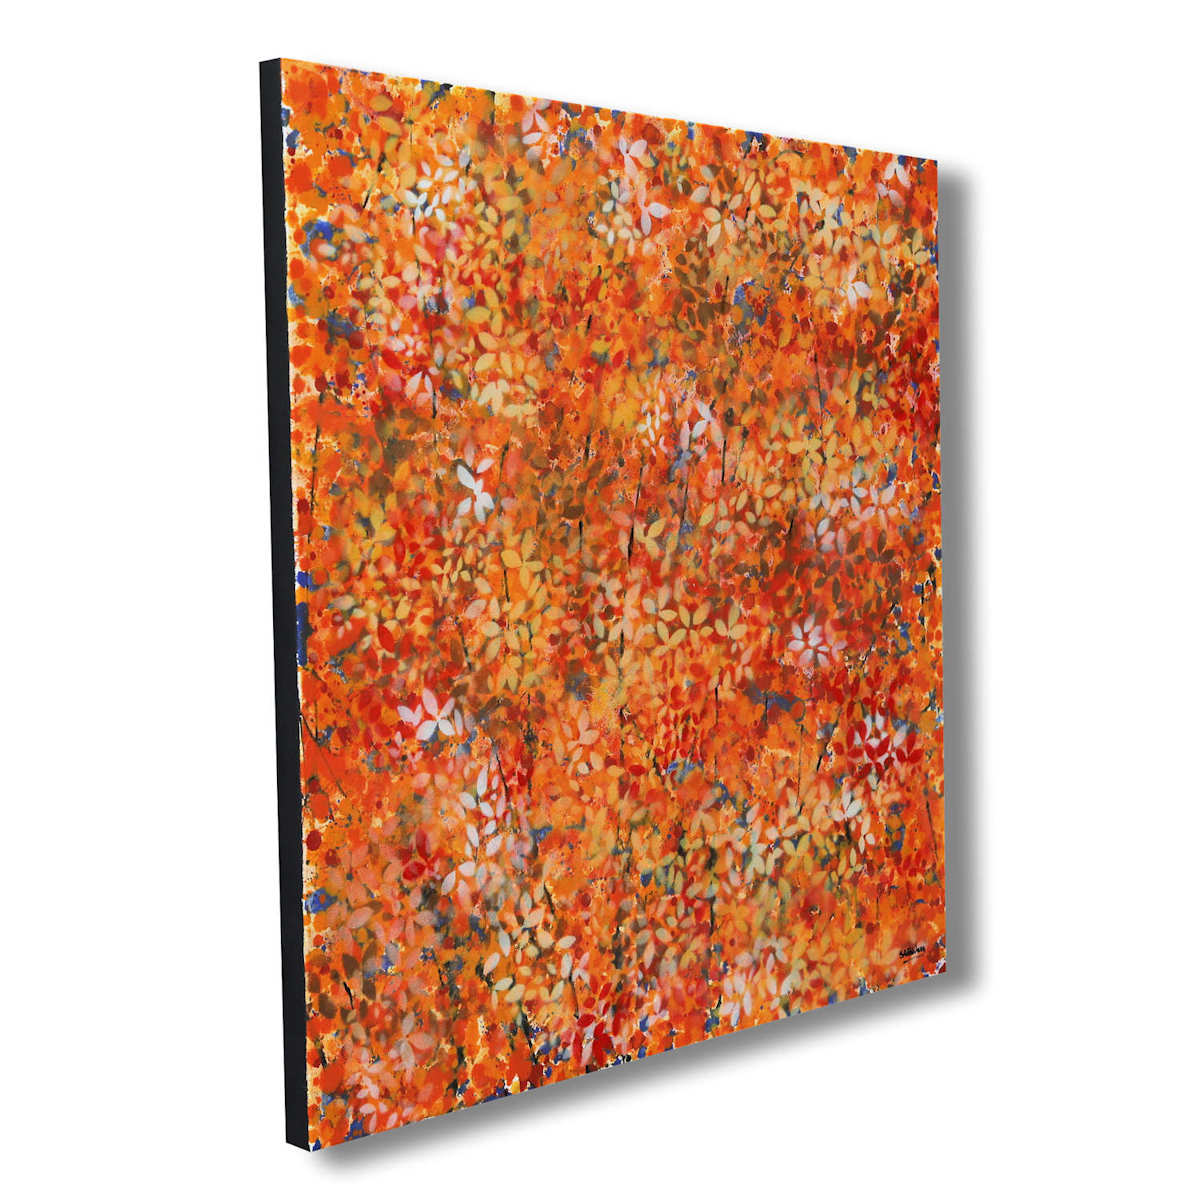 Large abstract artwork